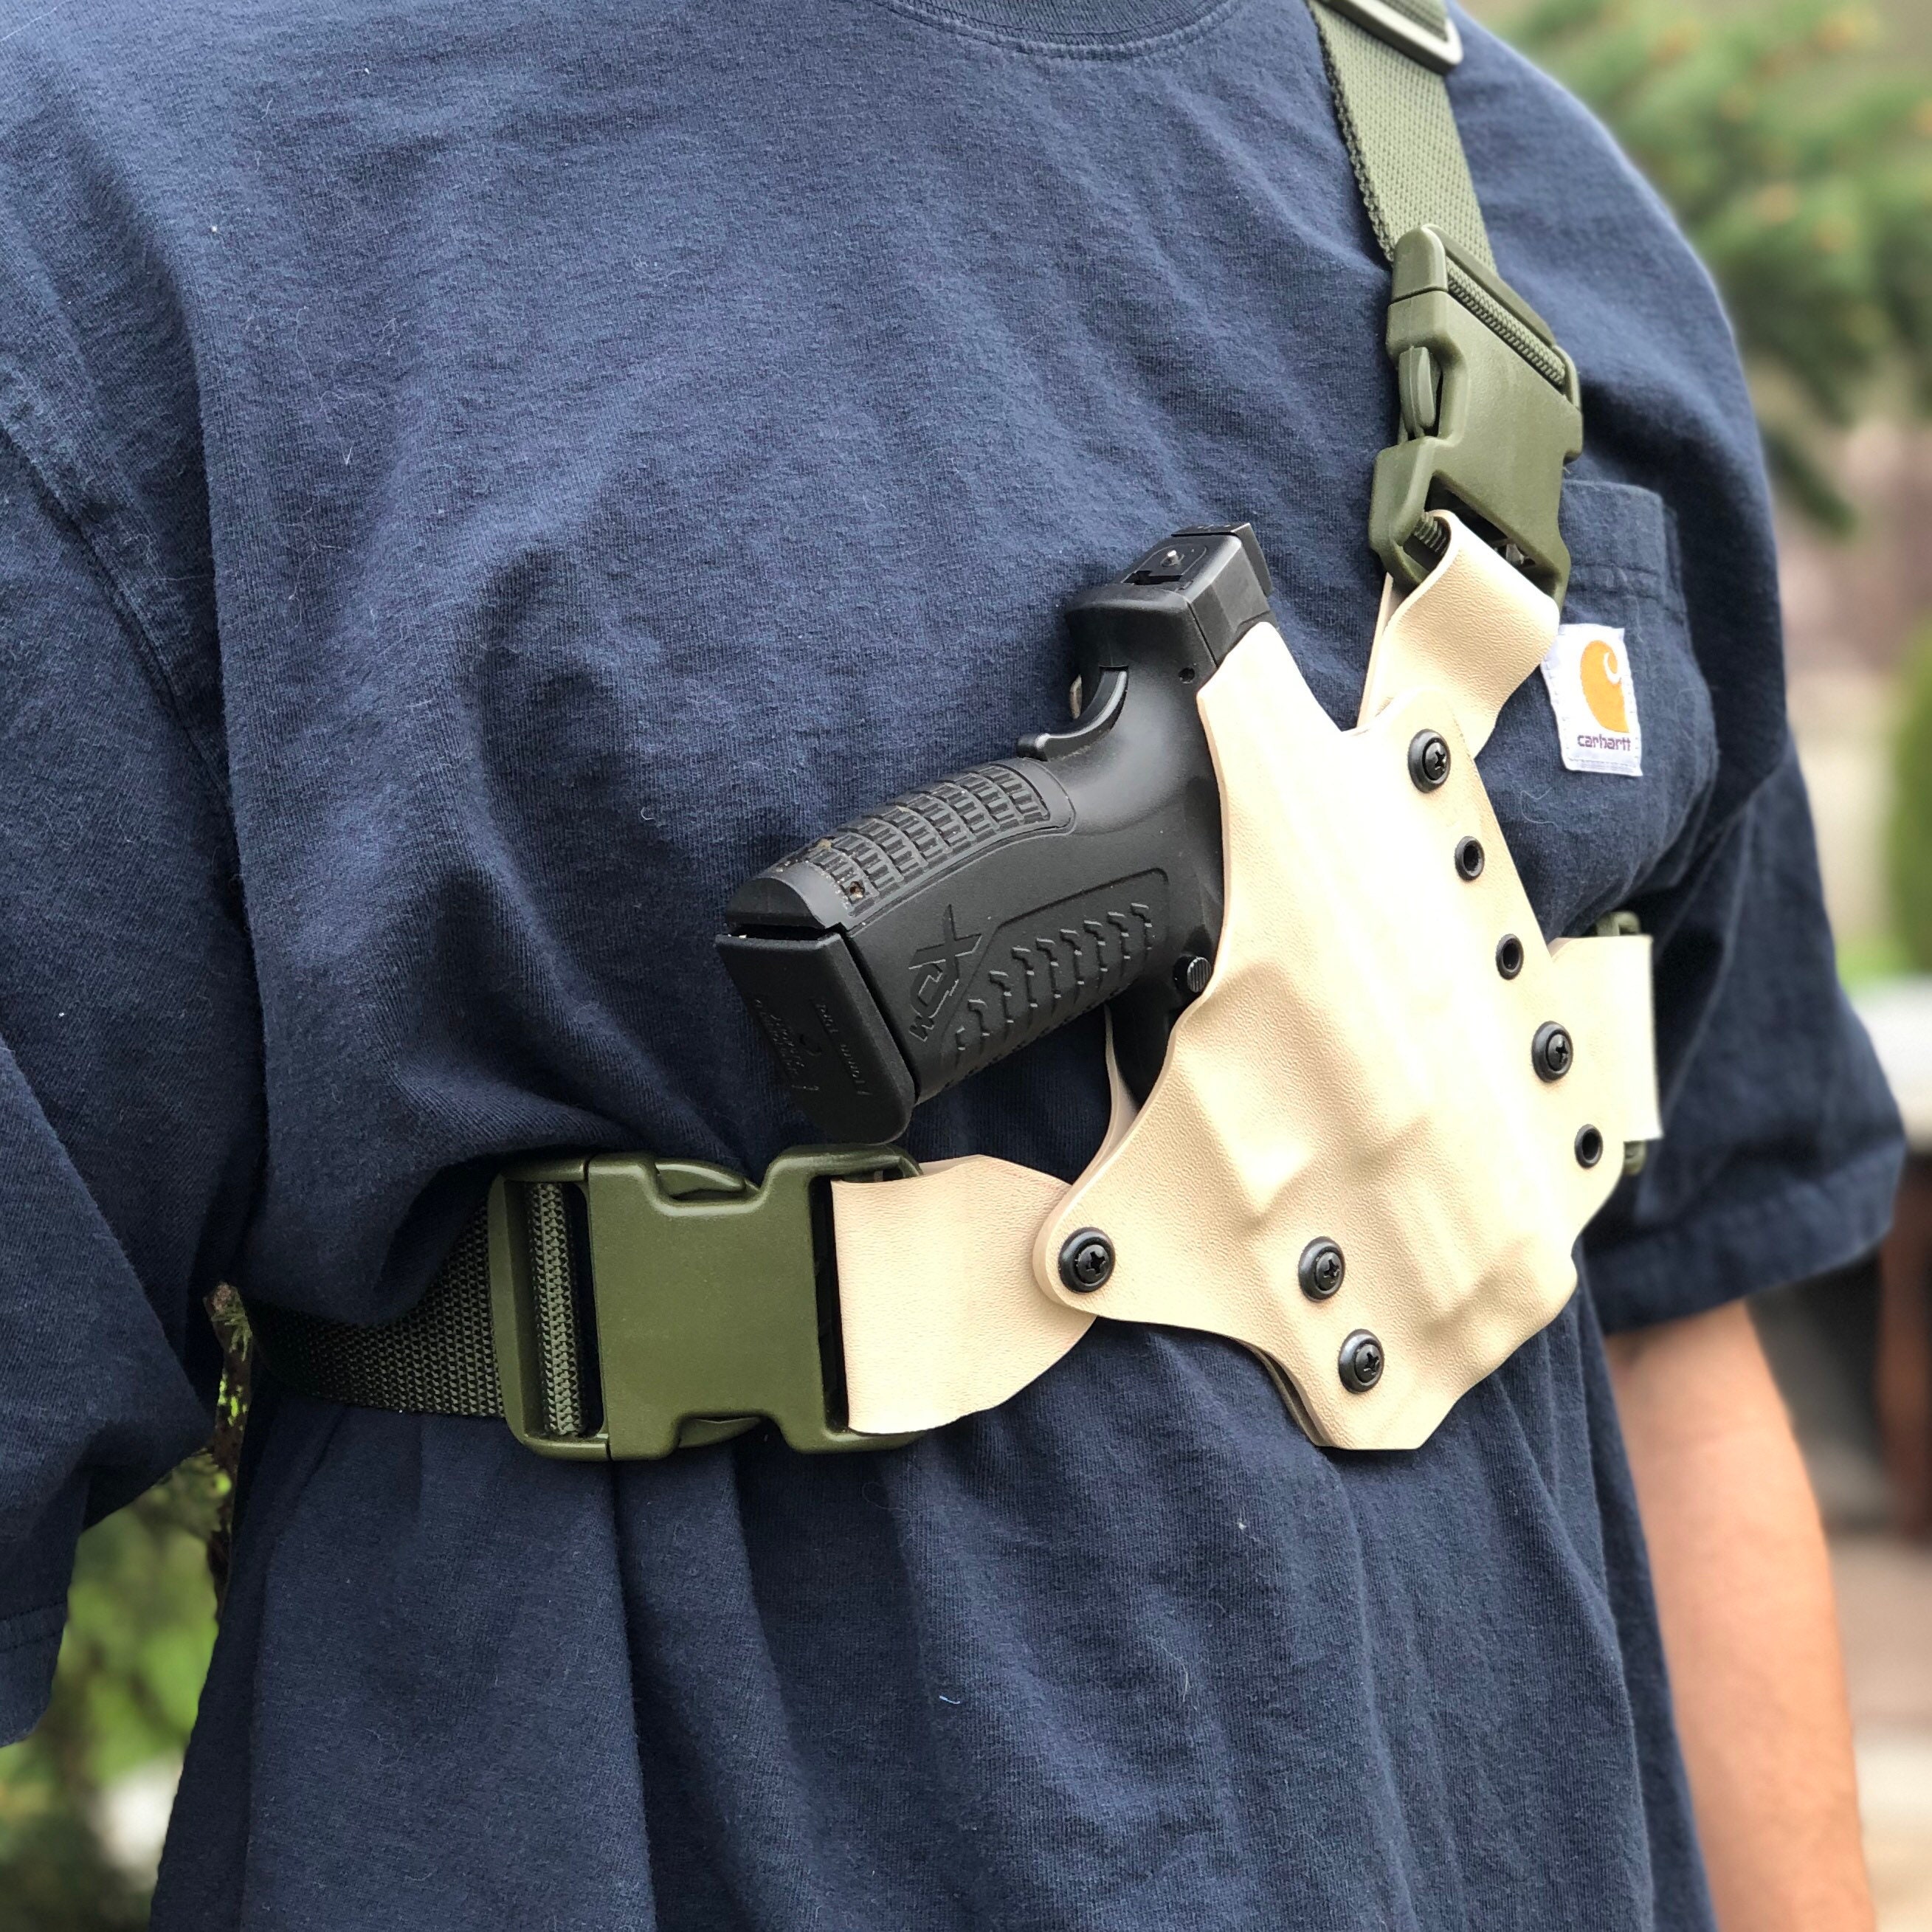 16+ Hellcat Holster With Light